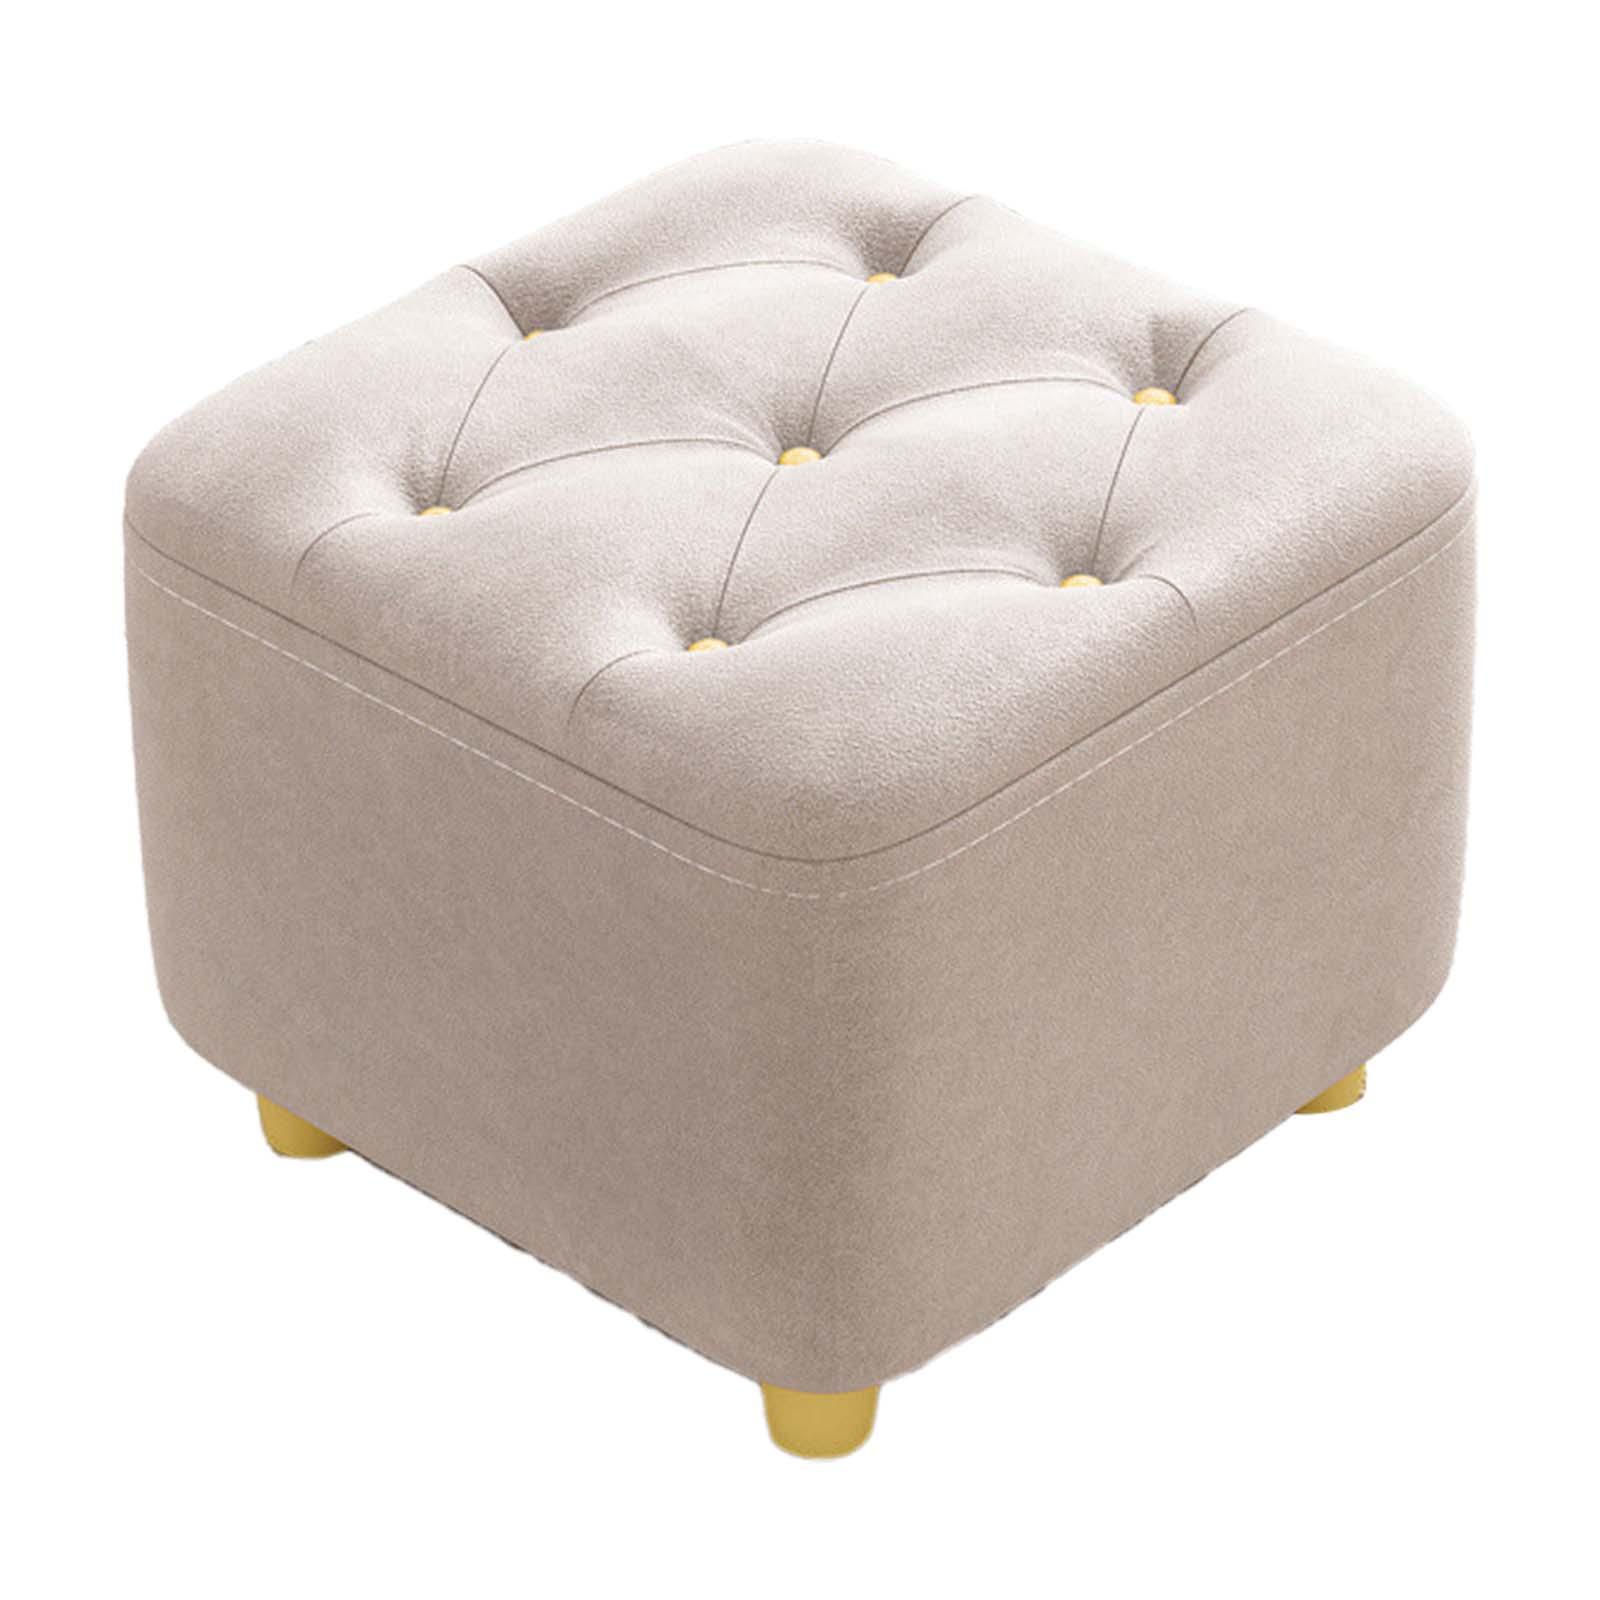 Square Footstool Foot Stool Comfortable Stepstool Creative Ottoman Stool Footrest for Living Room Dressing Room Bedroom Couch beige - image 5 of 8